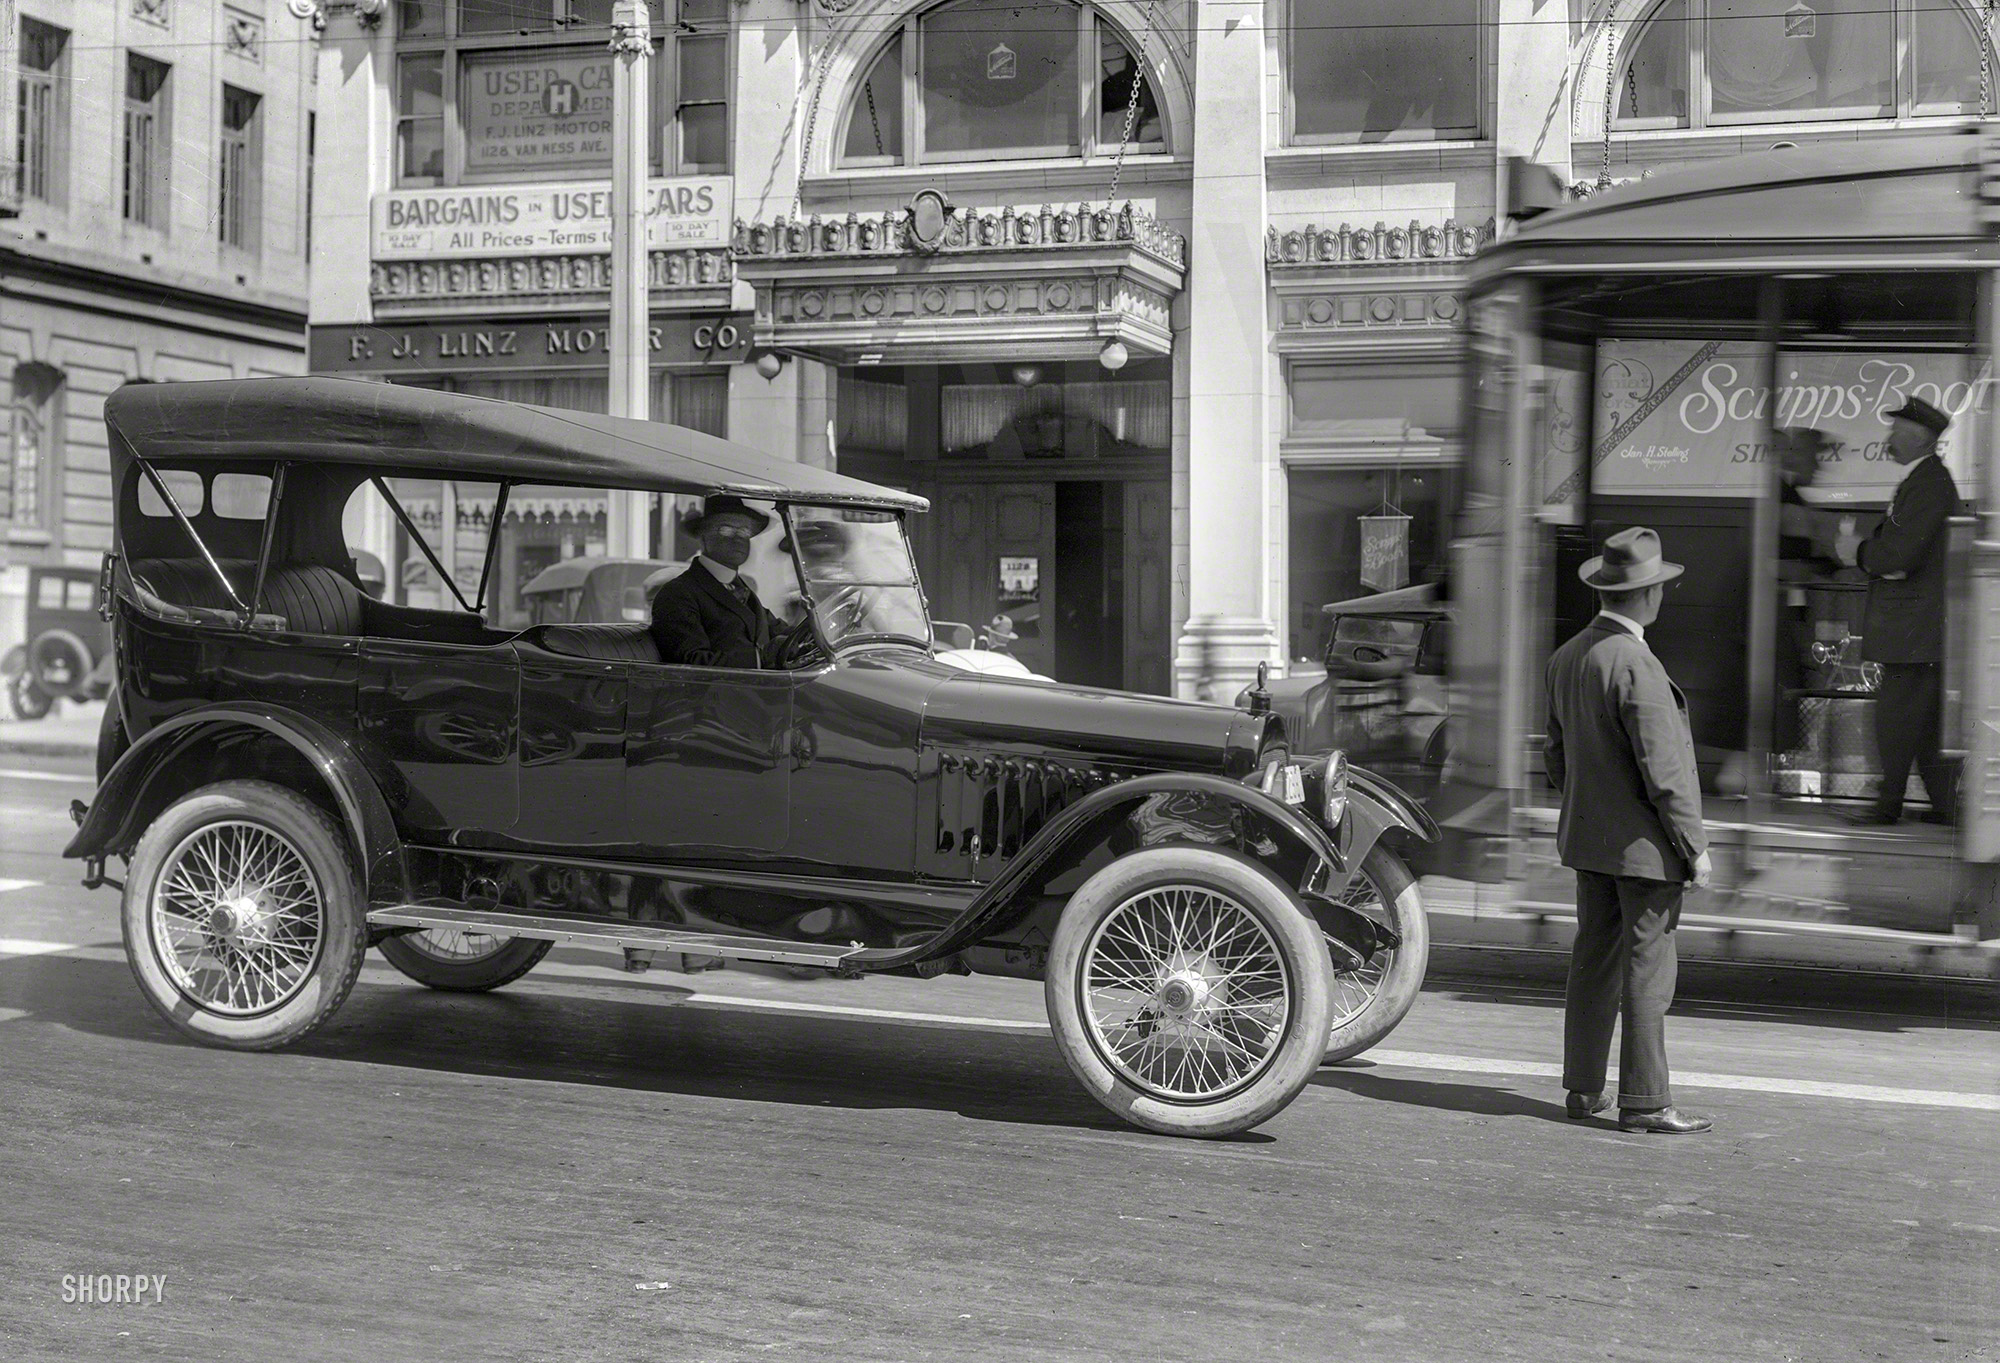 San Francisco circa 1920. "Chalmers touring car on Van Ness Avenue." At F.J. Linz Motor Co., your Scripps-Booth dealer. With a streetcar squeezing by.  5x7 glass negative by Christopher Helin. View full size.